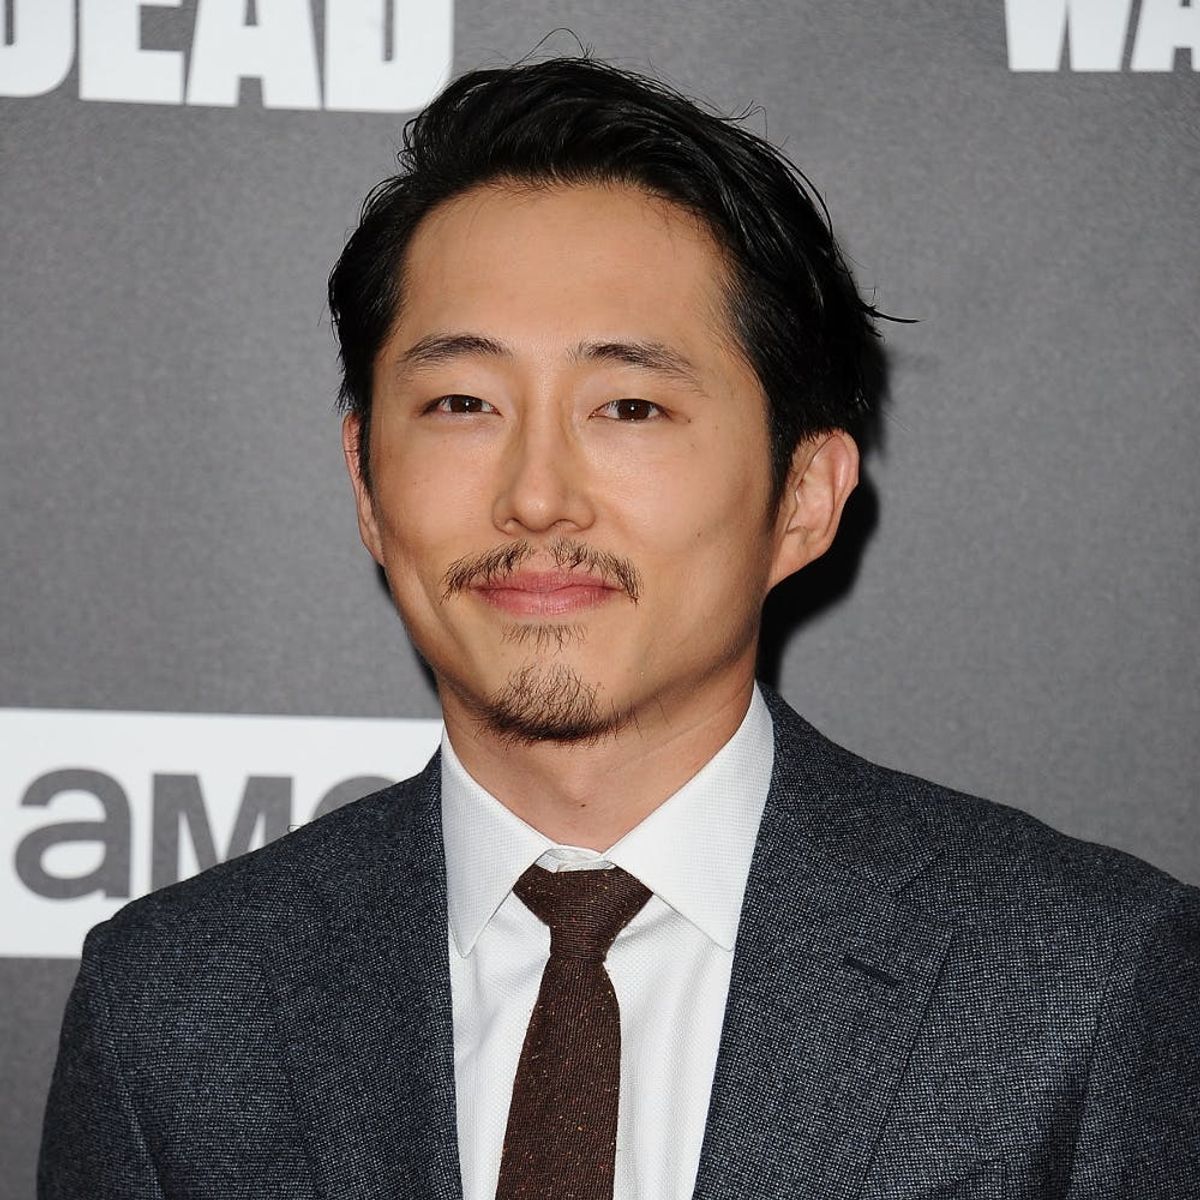 The Walking Dead’s Newly Married Steven Yeun Is Going to Be a Dad